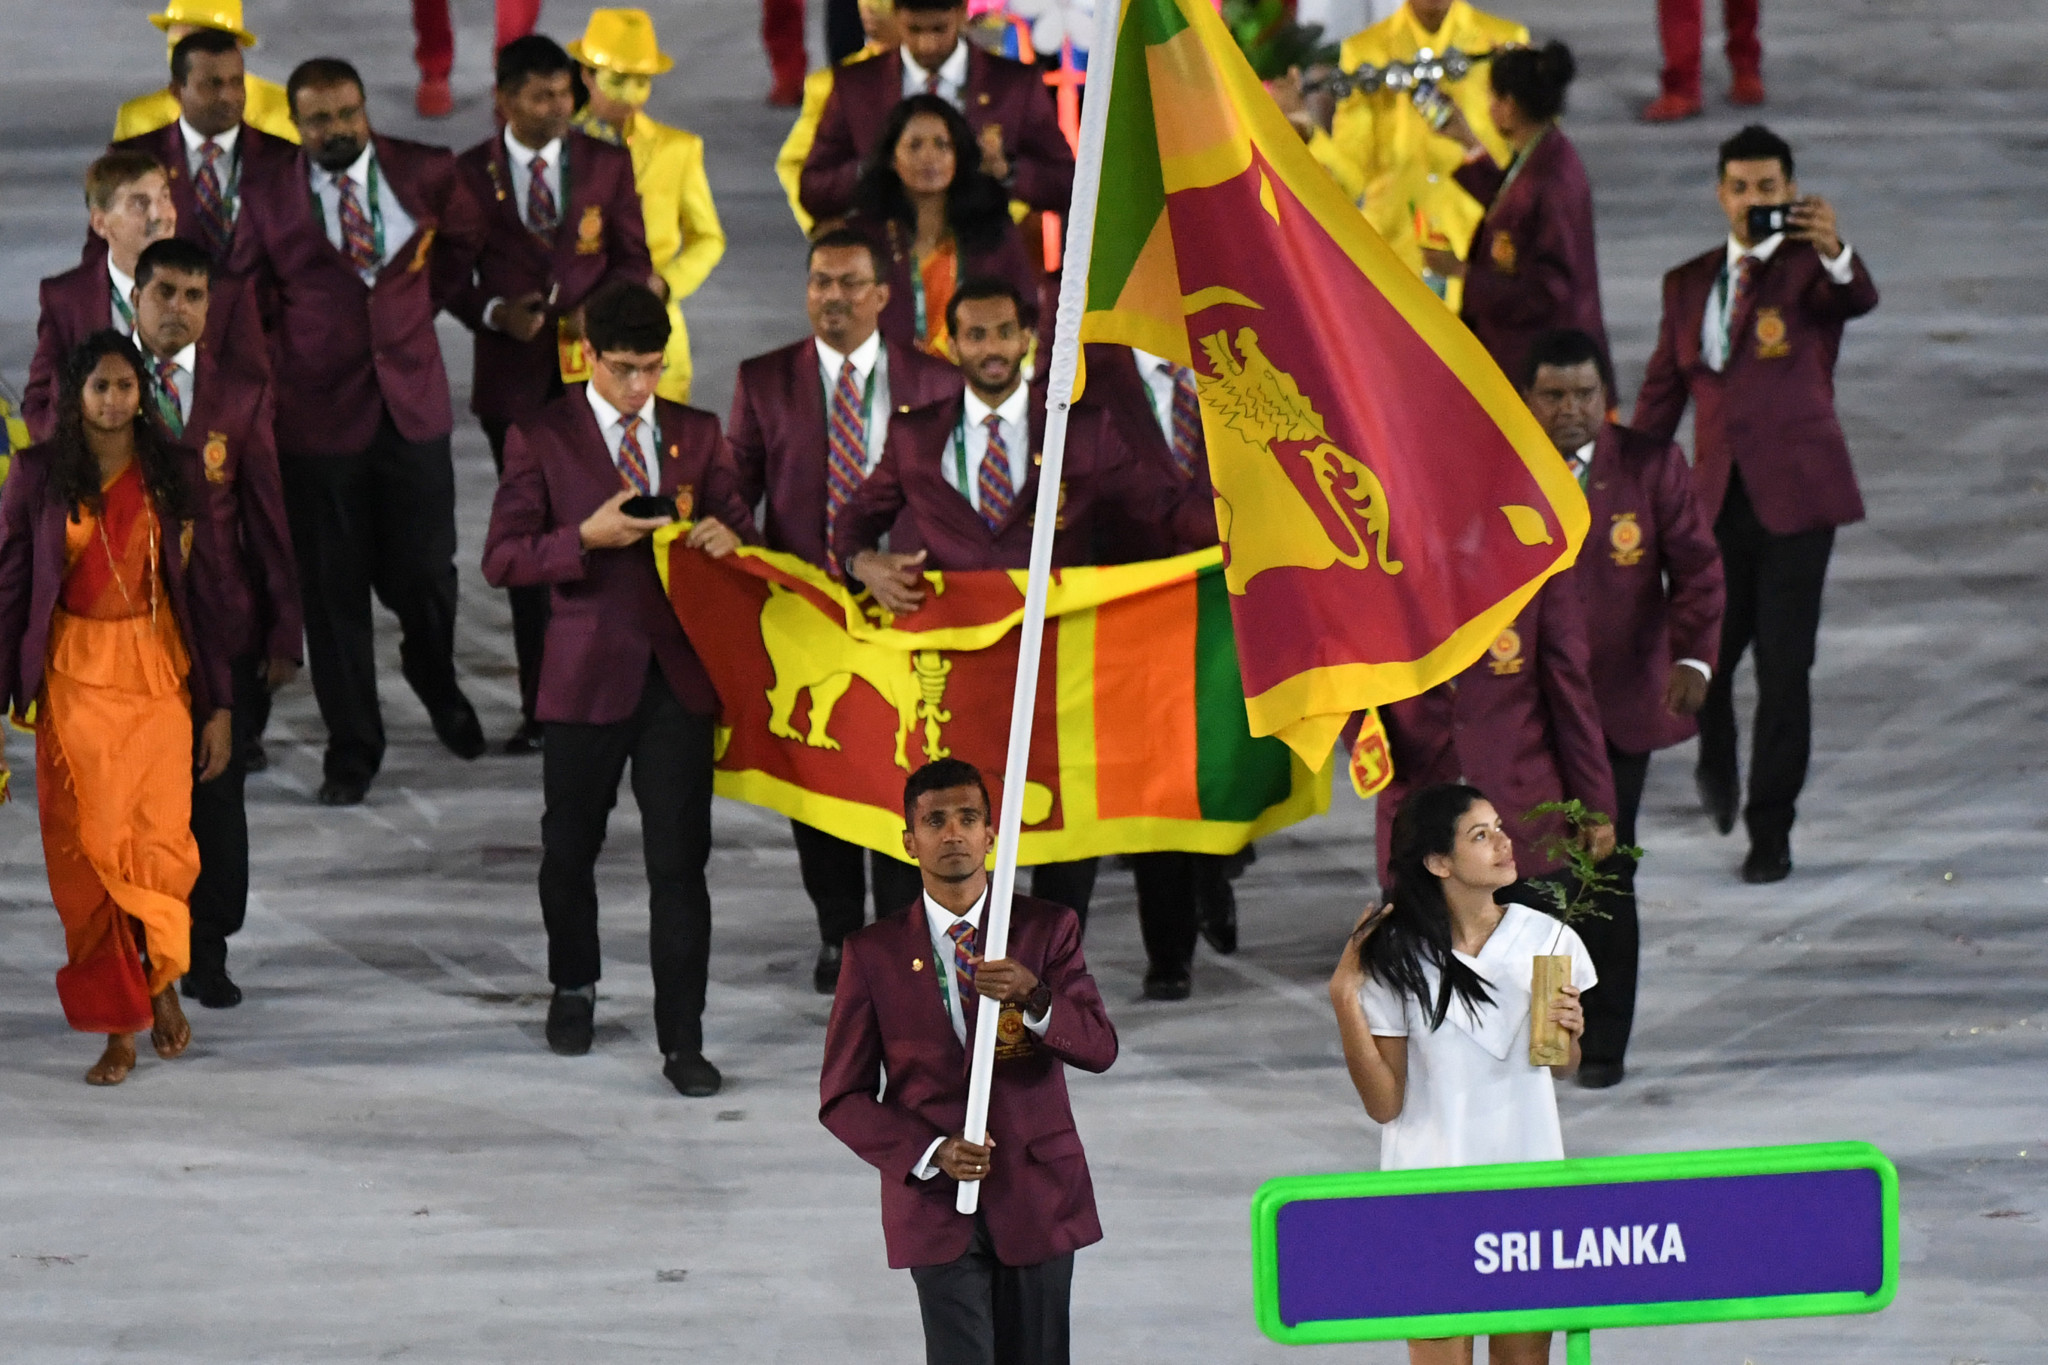 The Sri Lanka National Olympic Committee has distributed funding ©Getty Images